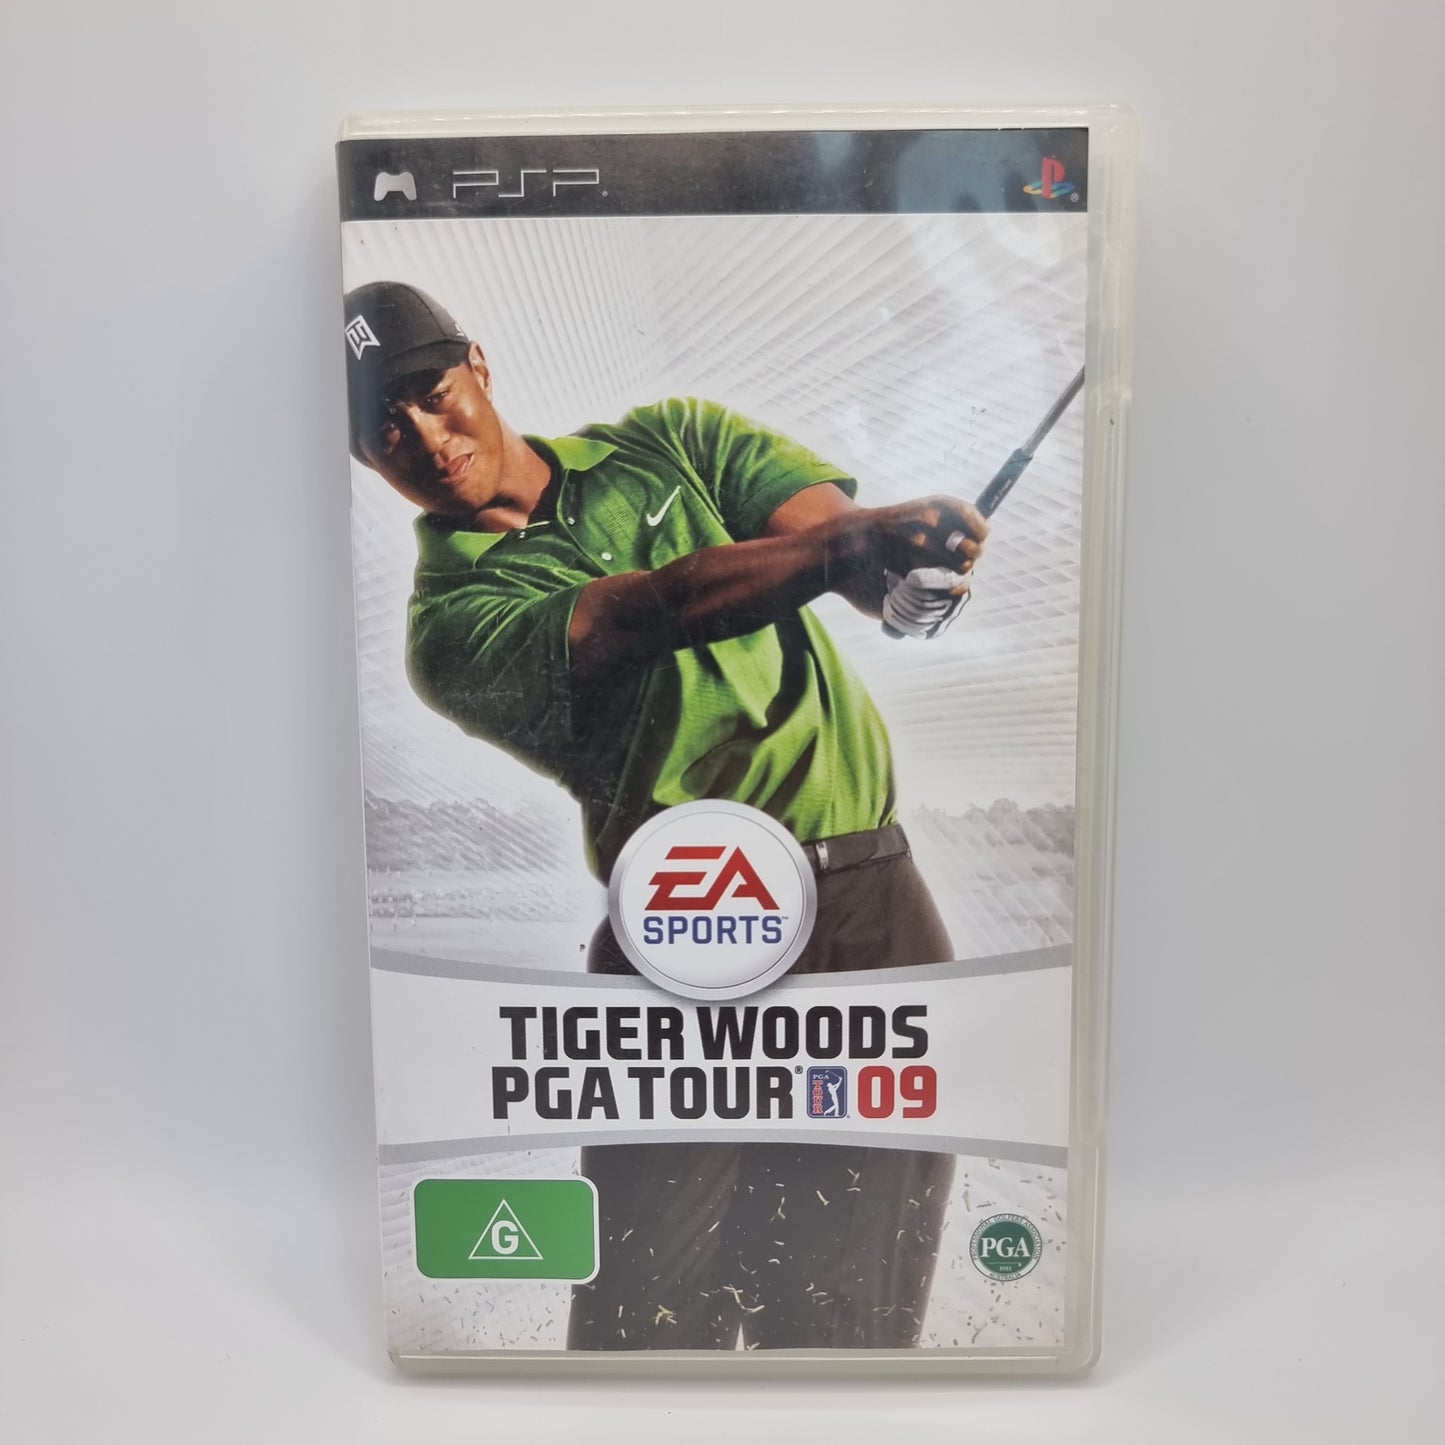 Tiger Woods PGA Tour 09 PSP Game - Pre-Owned